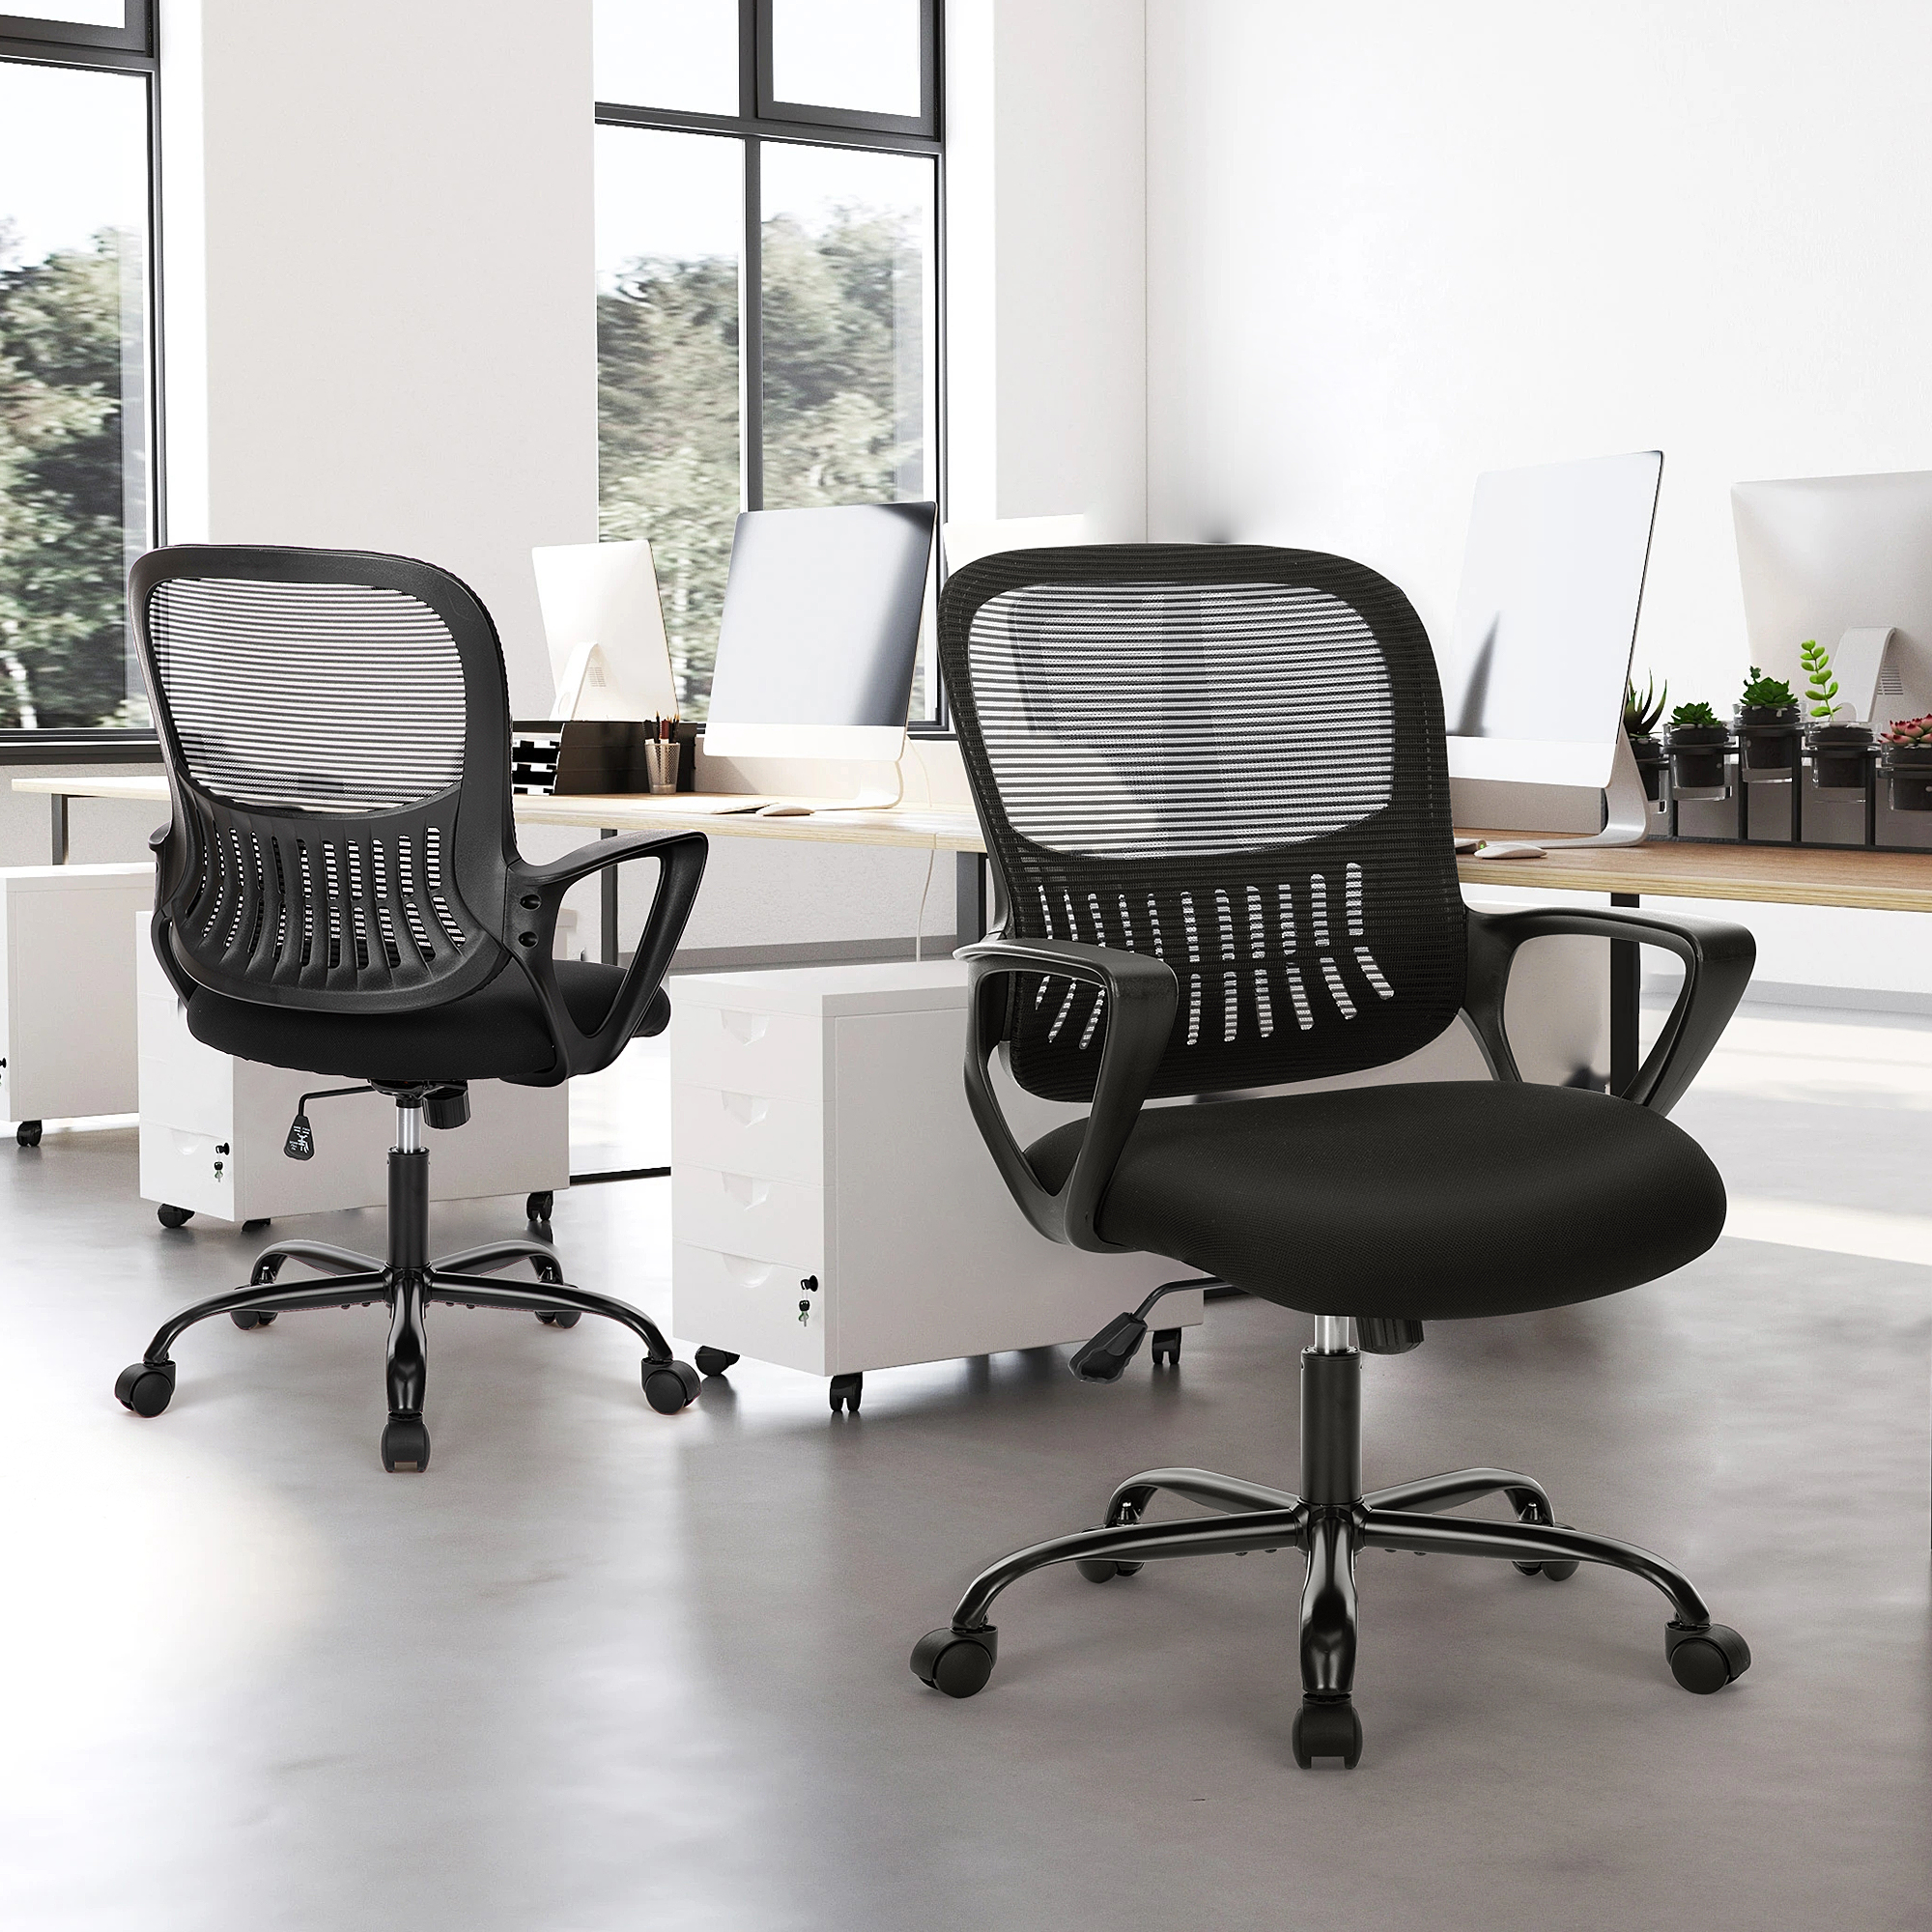 Yangming Mid Back Office Chair, Mesh Ergonomic Swivel Computer Desk Chair with Lumbar Support, Black - image 2 of 9